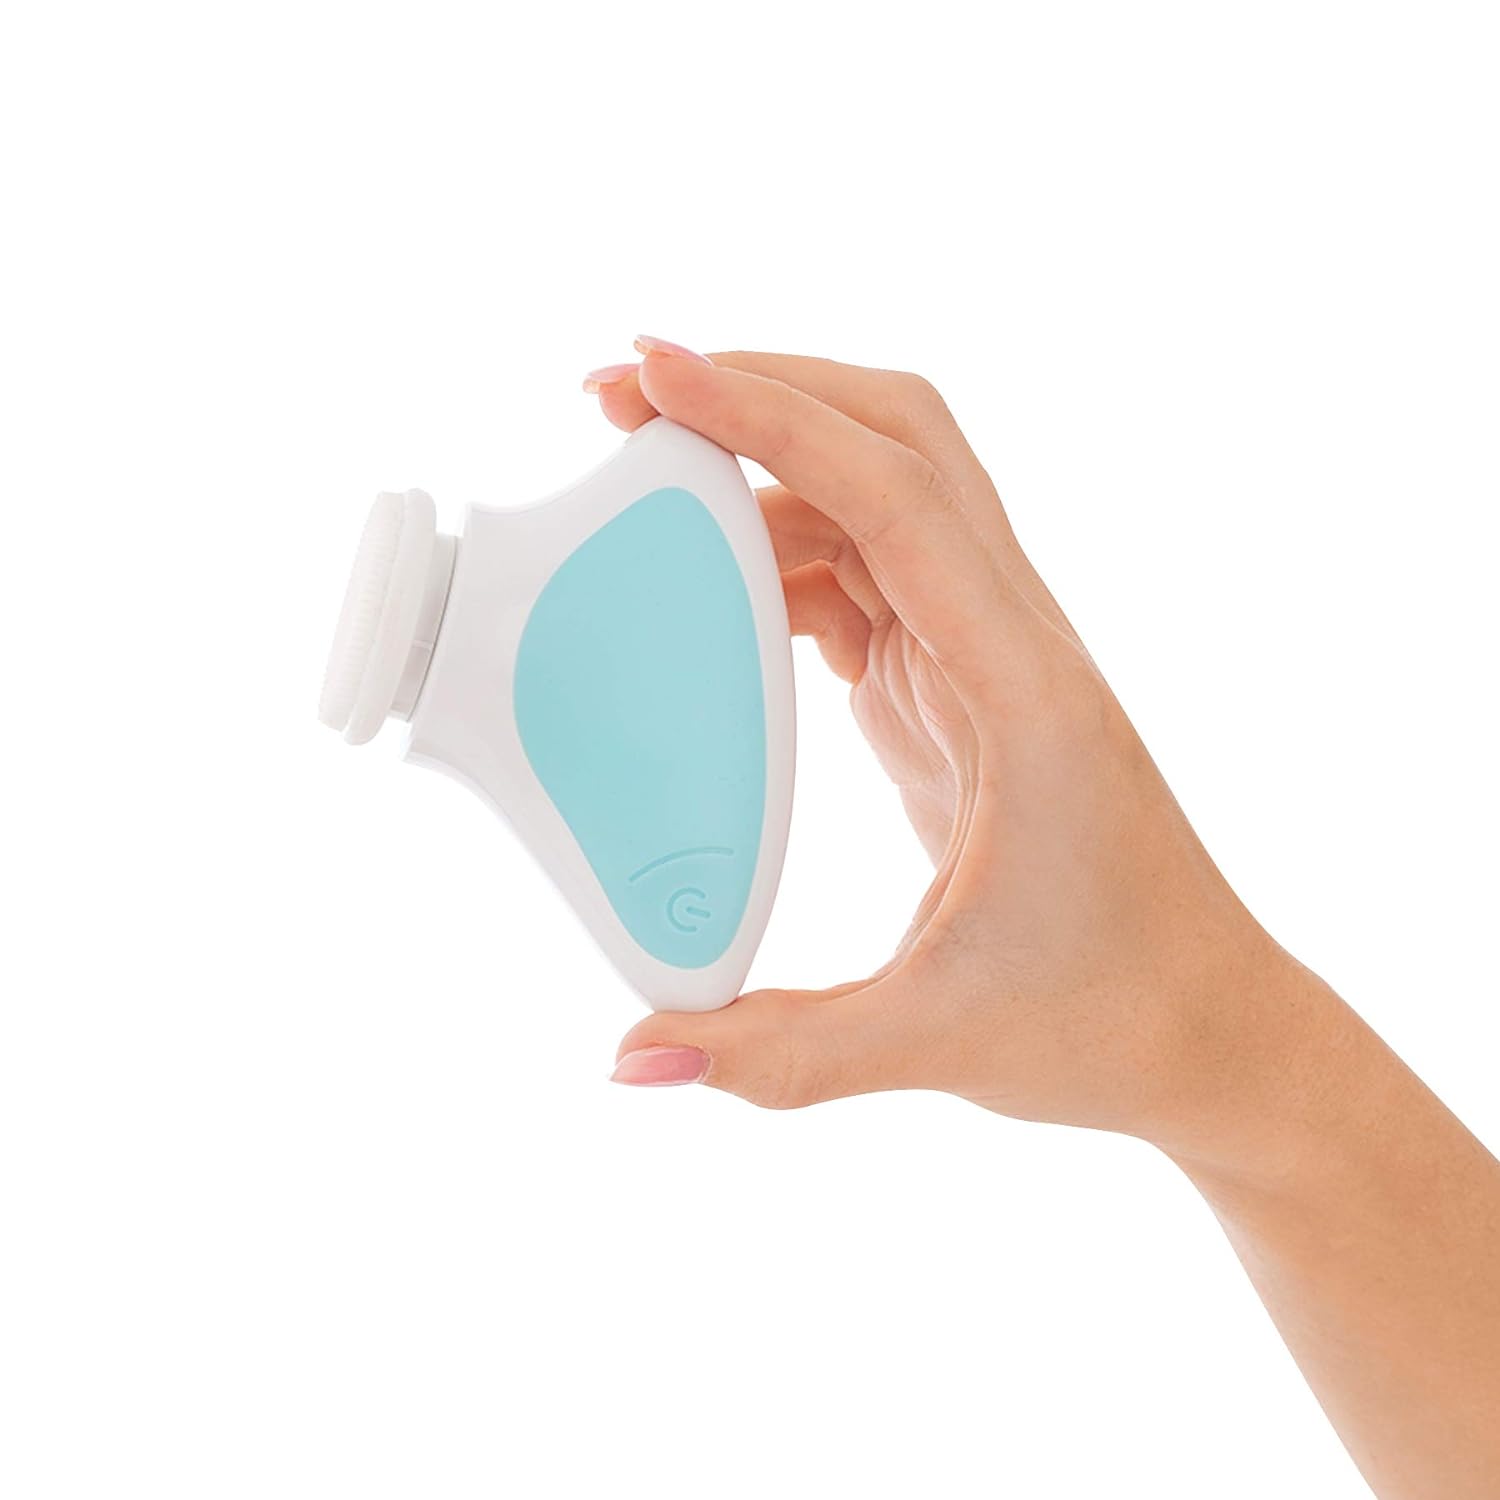 Sonic Facial Cleanser Deeply cleanses and unclogs pores